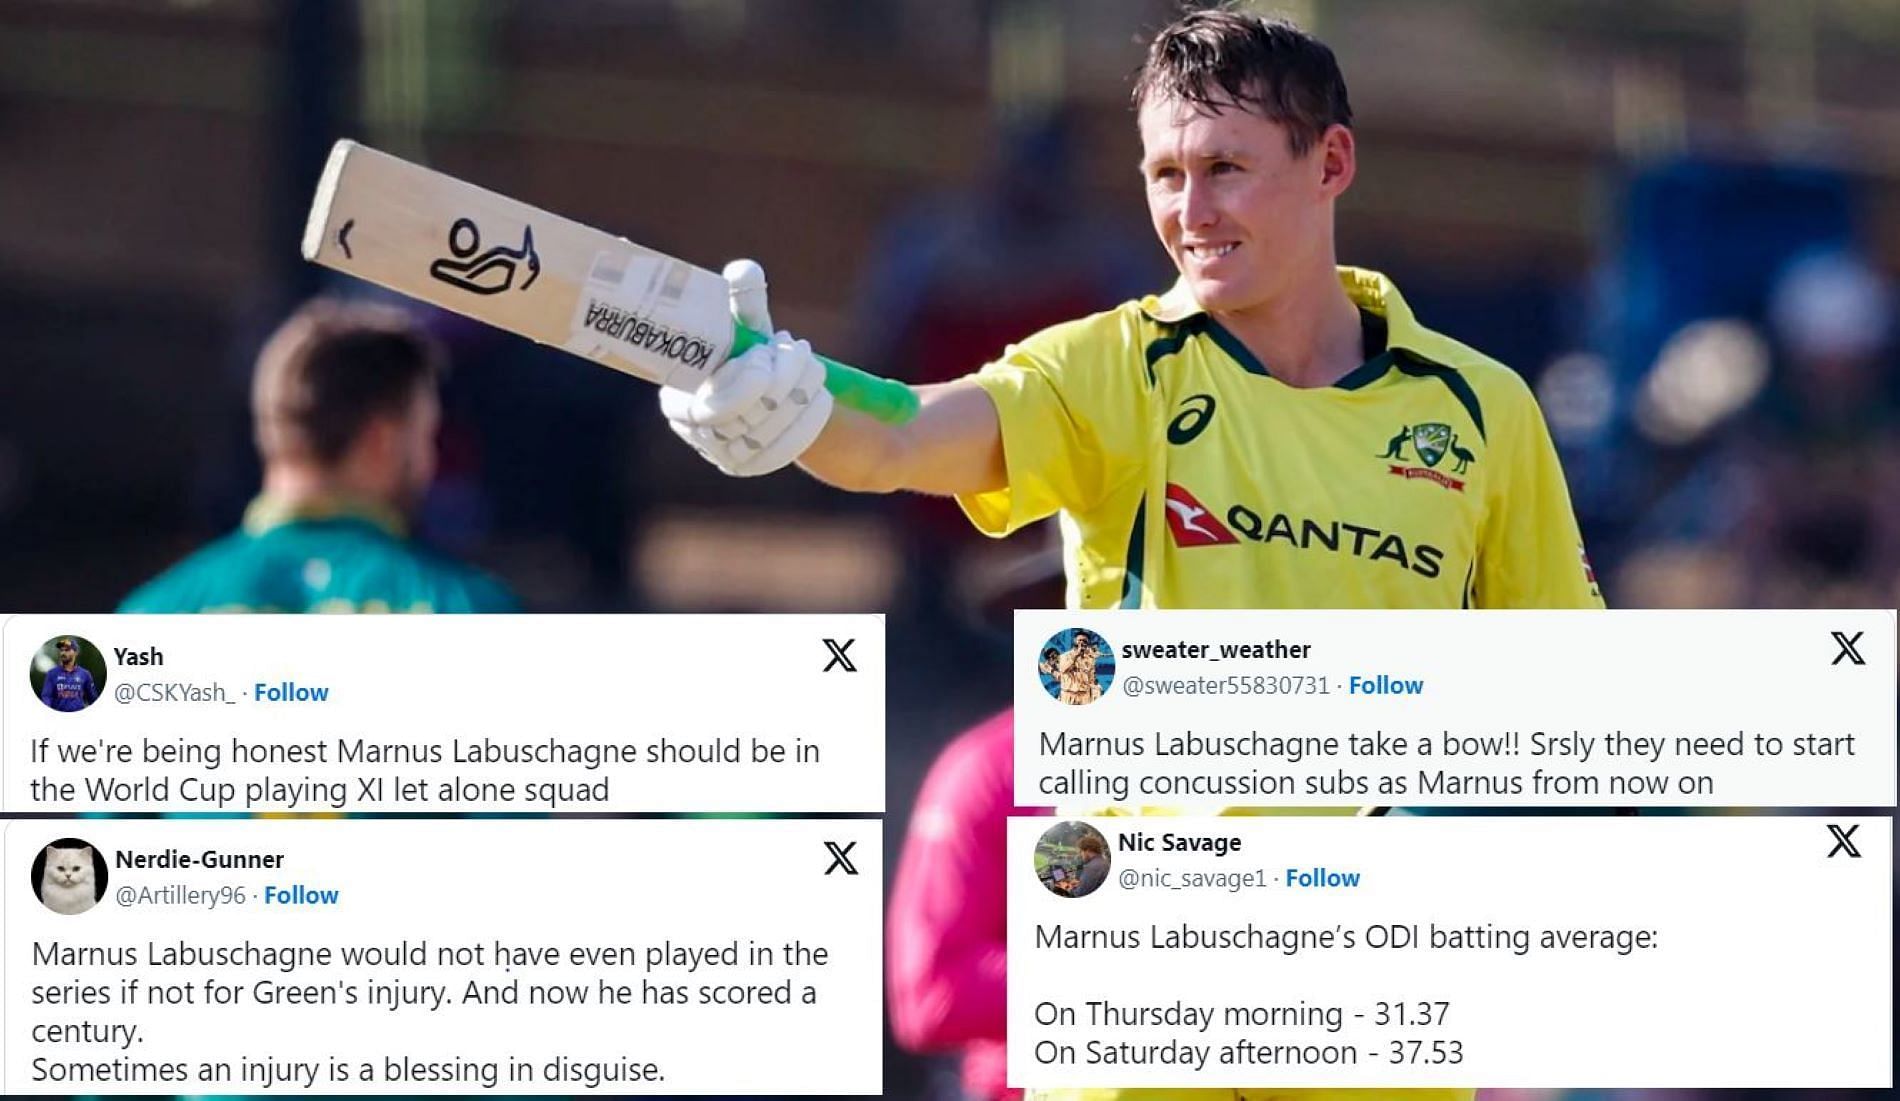 Labuschagne continued his heroics in the ODI series against the Proteas